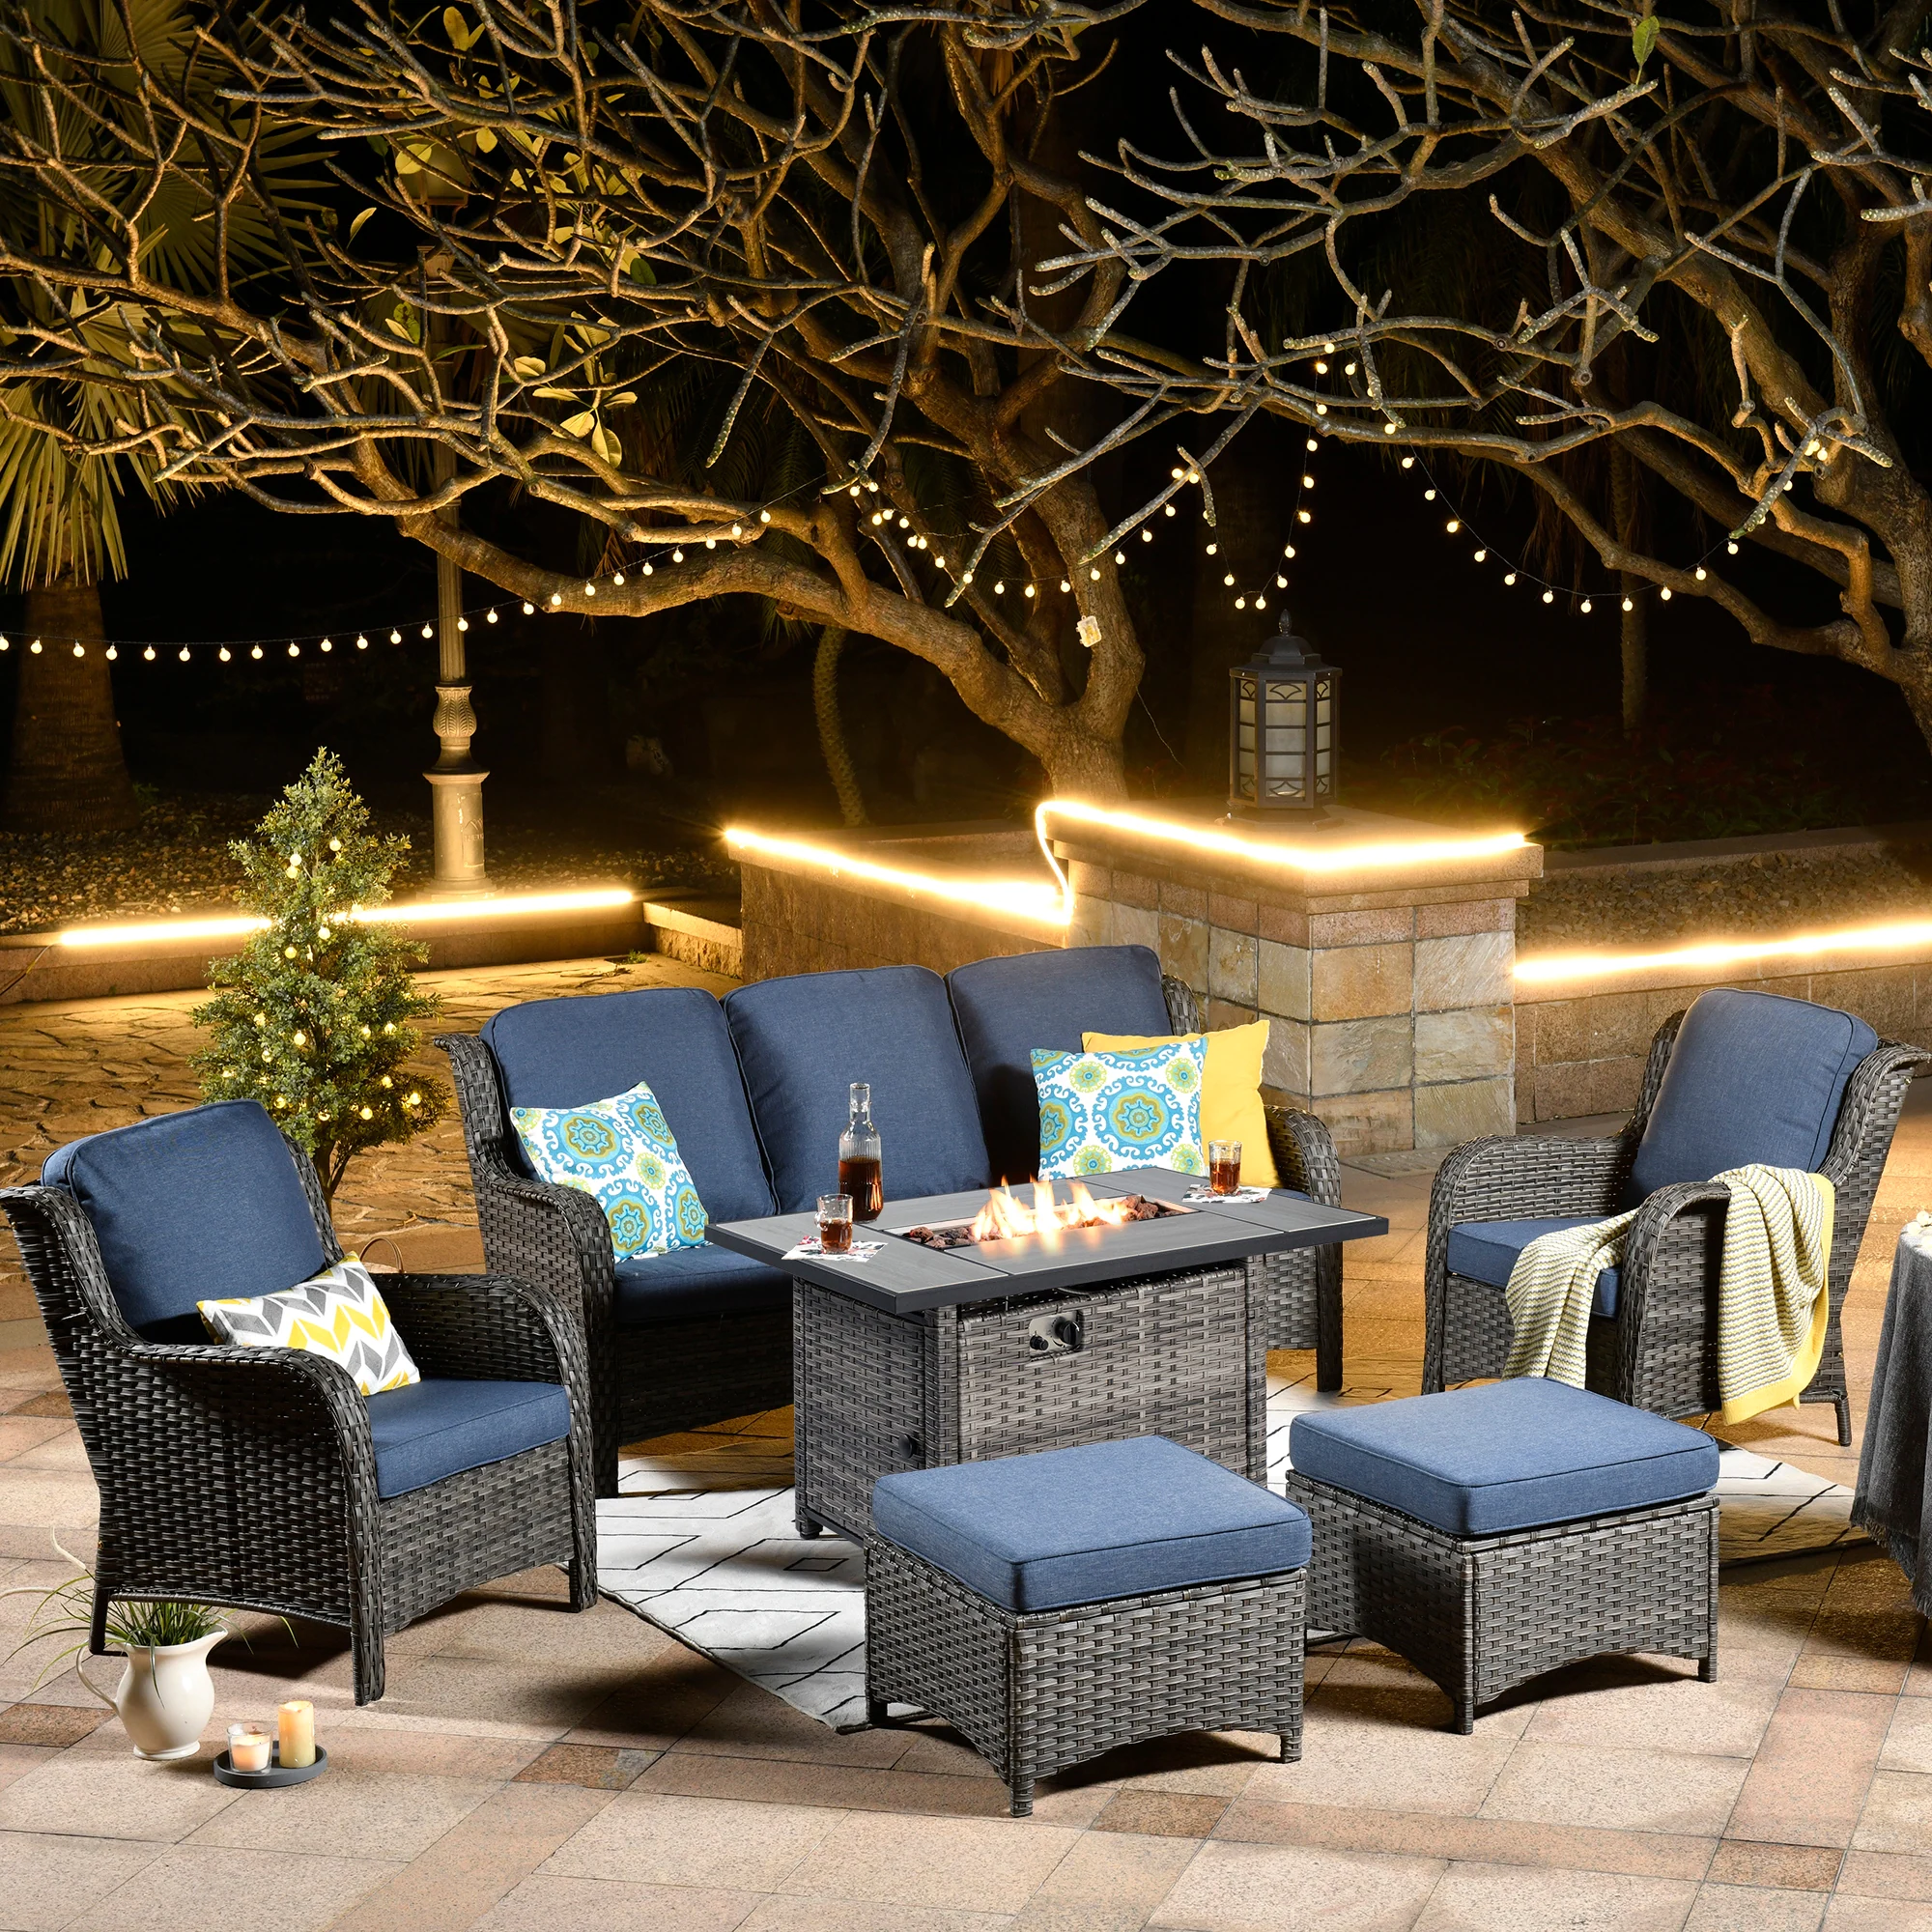 Night Out on rectangular patio